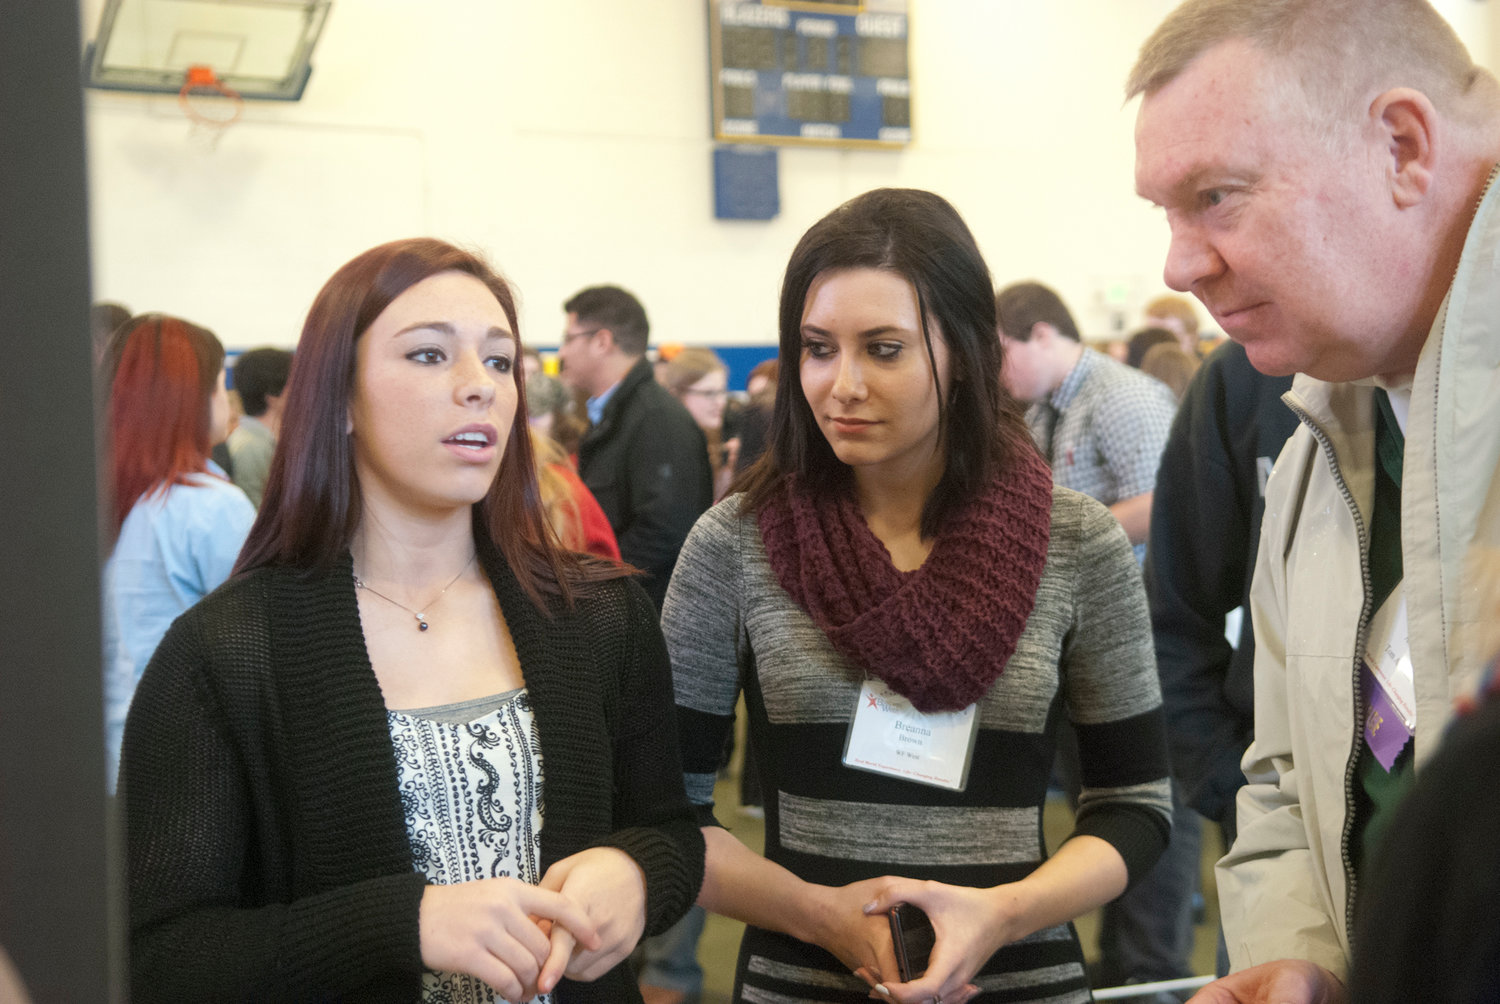 Students Kyndra Haller, left, and Breanna Brown pitch their company’s product to judge Tom Alderson, who was acting as a potential investor at the mock trade show Thursday at Washington Business Week at Centralia College. More than 400 juniors from Centralia and W.F. West high schools attended the annual four-day event.